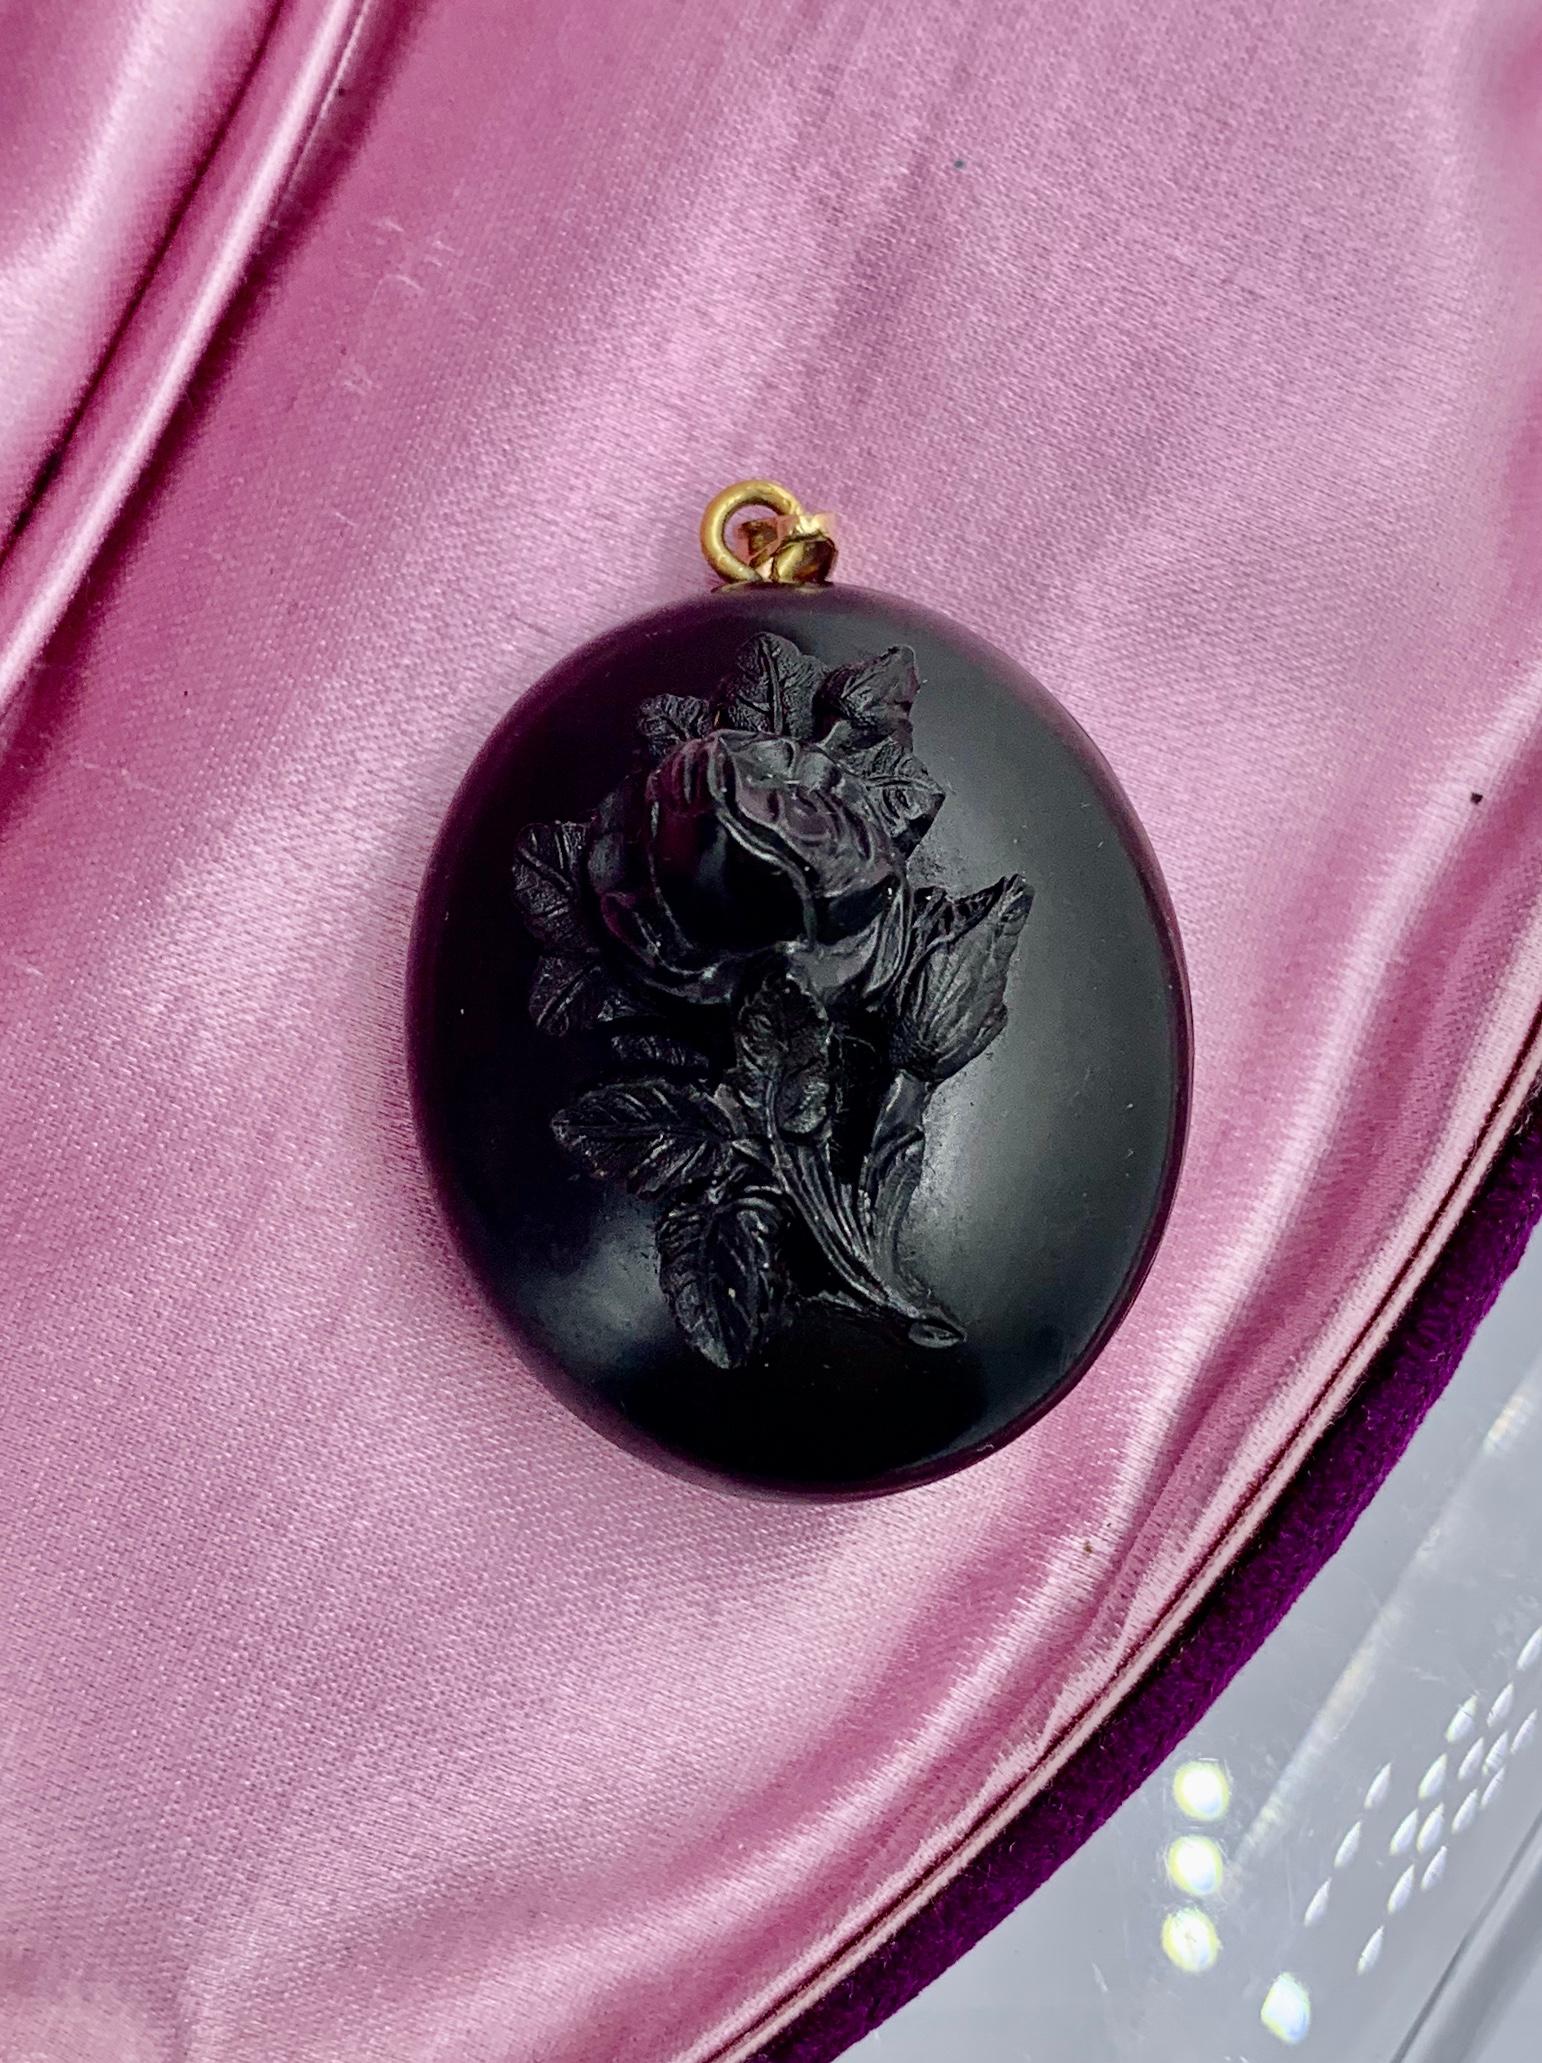 A rare and wonderful Victorian Locket pendant with a gorgeous fully three dimensional depiction of a Rose Flower on the front.  The black locket dates to the Victorian era.  It is Vulcanite.   The bale is 14 Karat Gold.  The very special piece opens